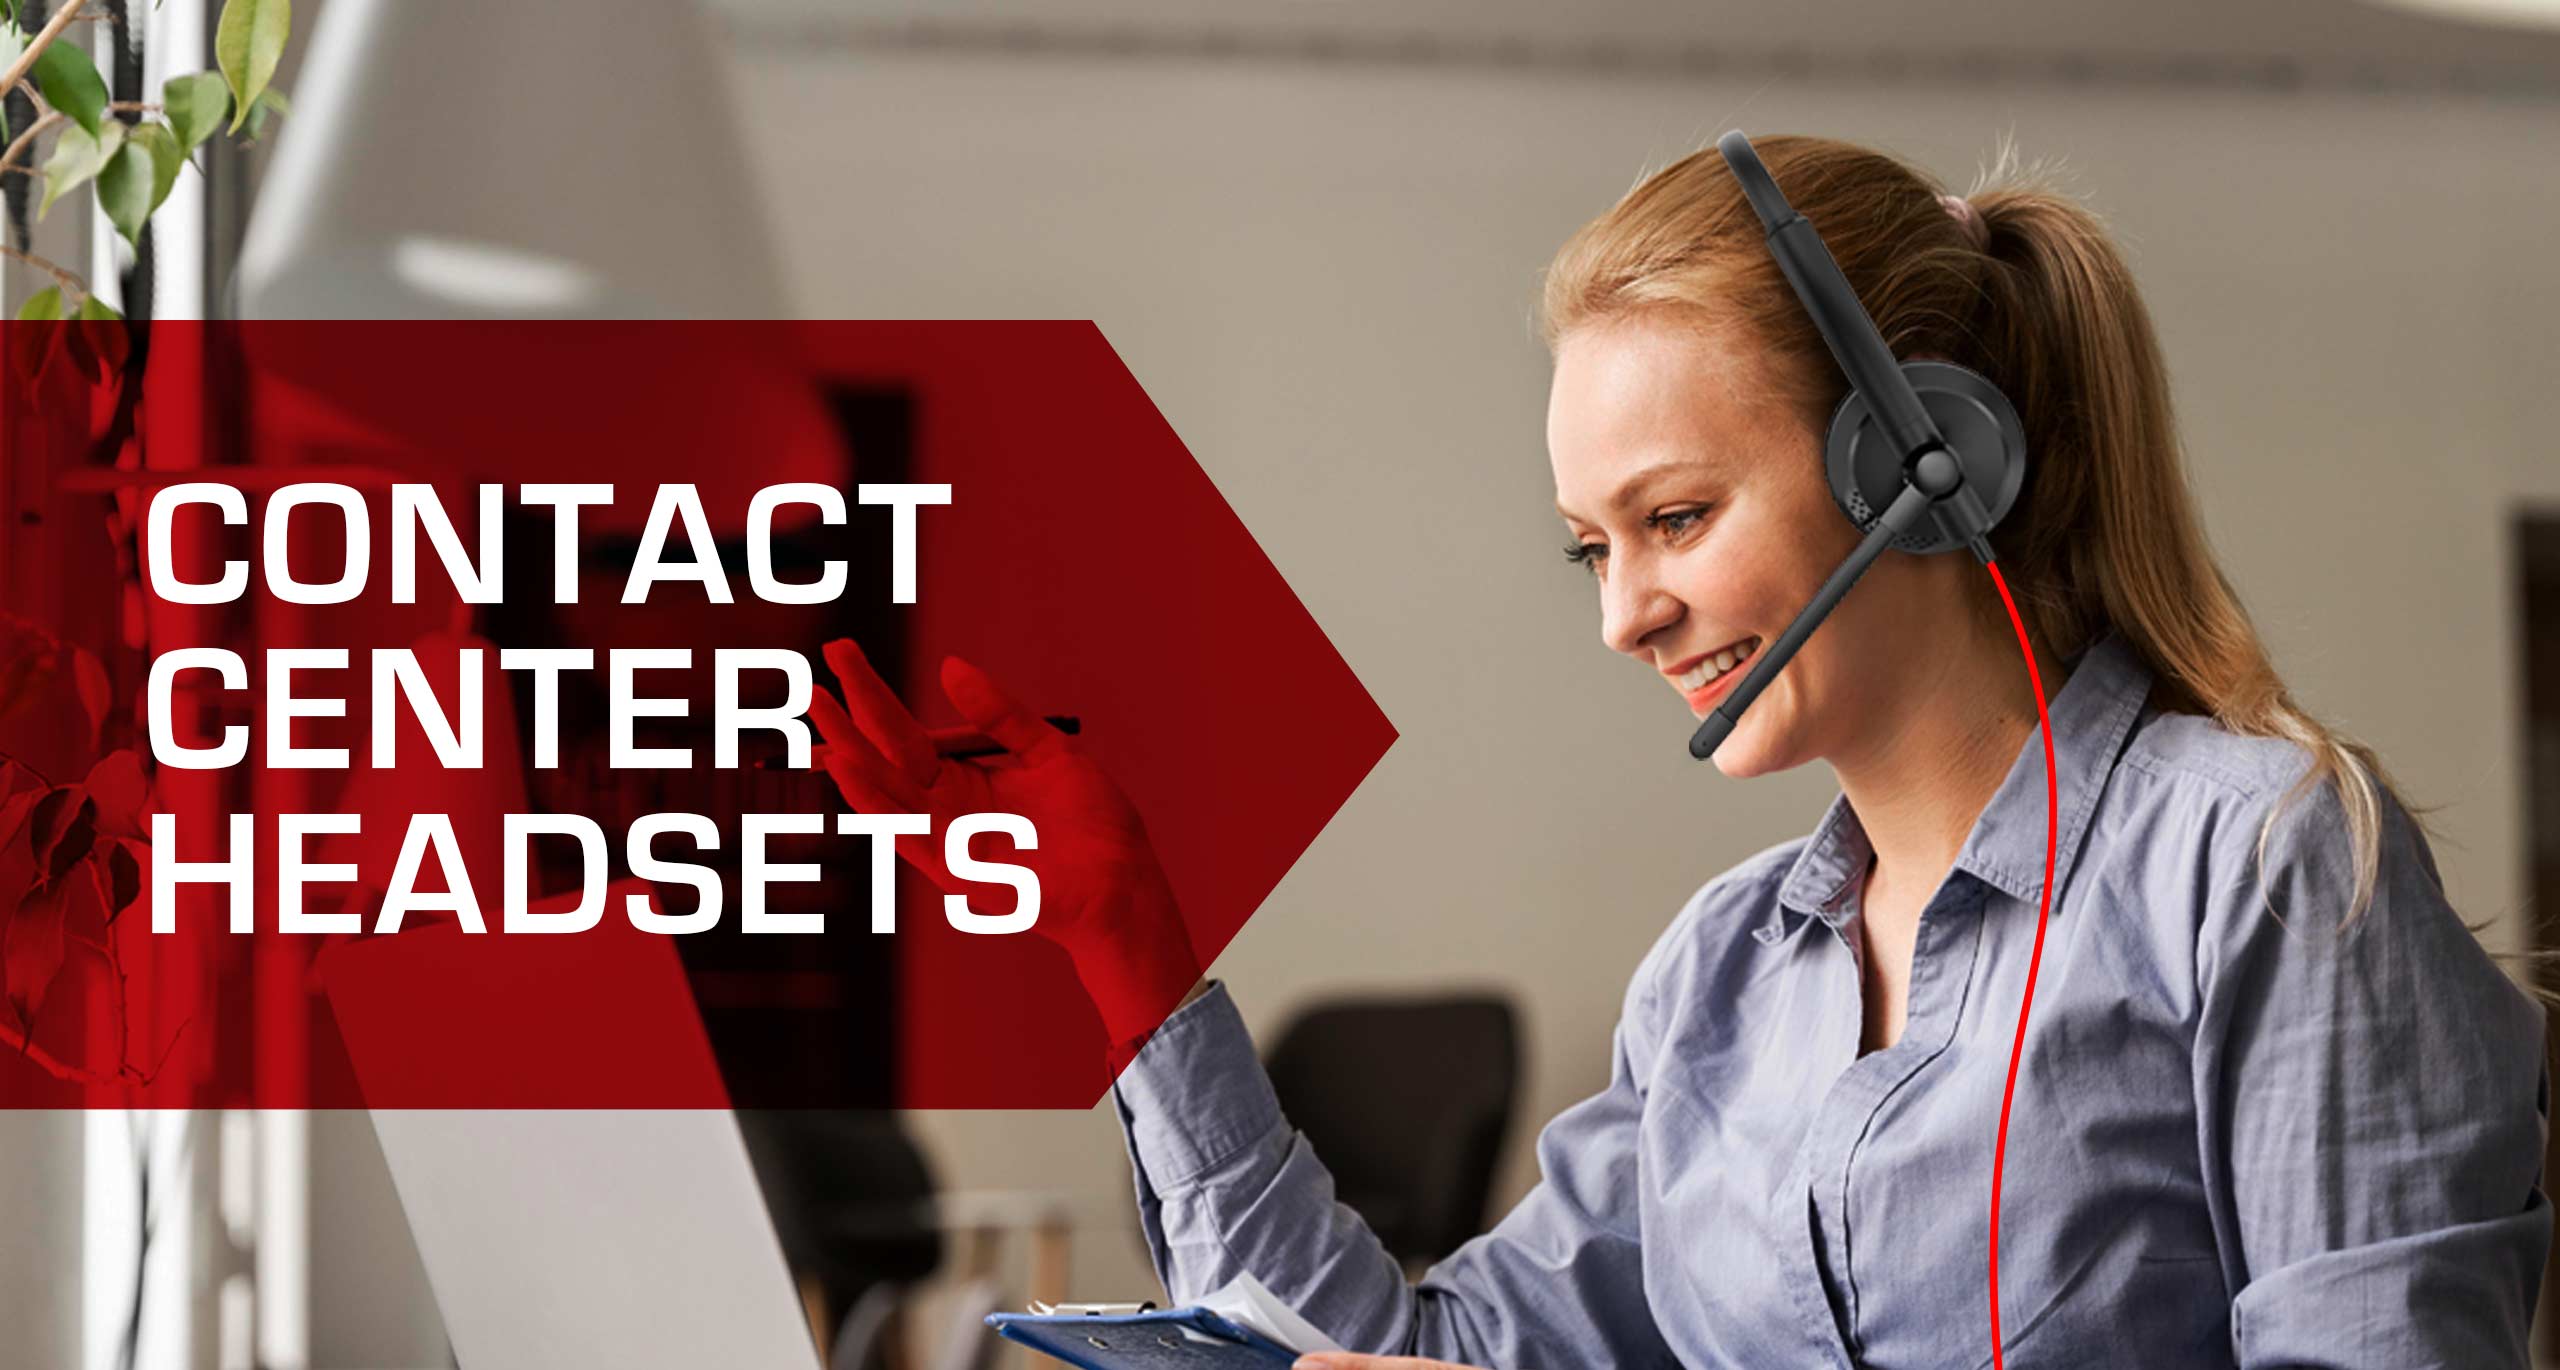 Contact Center Headsets